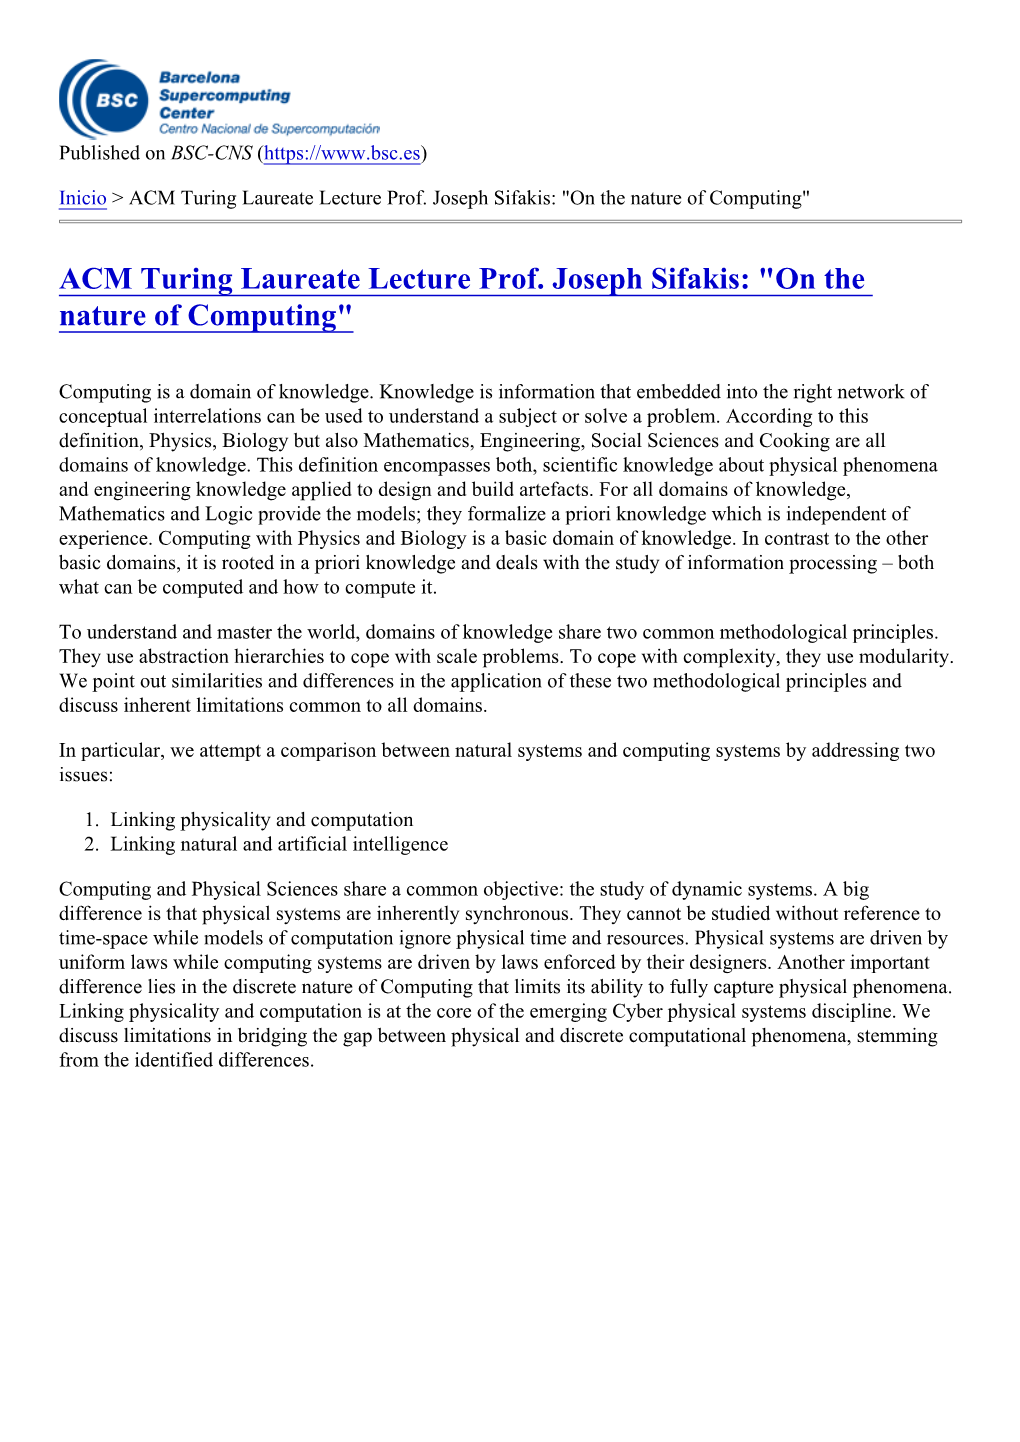 ACM Turing Laureate Lecture Prof. Joseph Sifakis: "On the Nature of Computing"